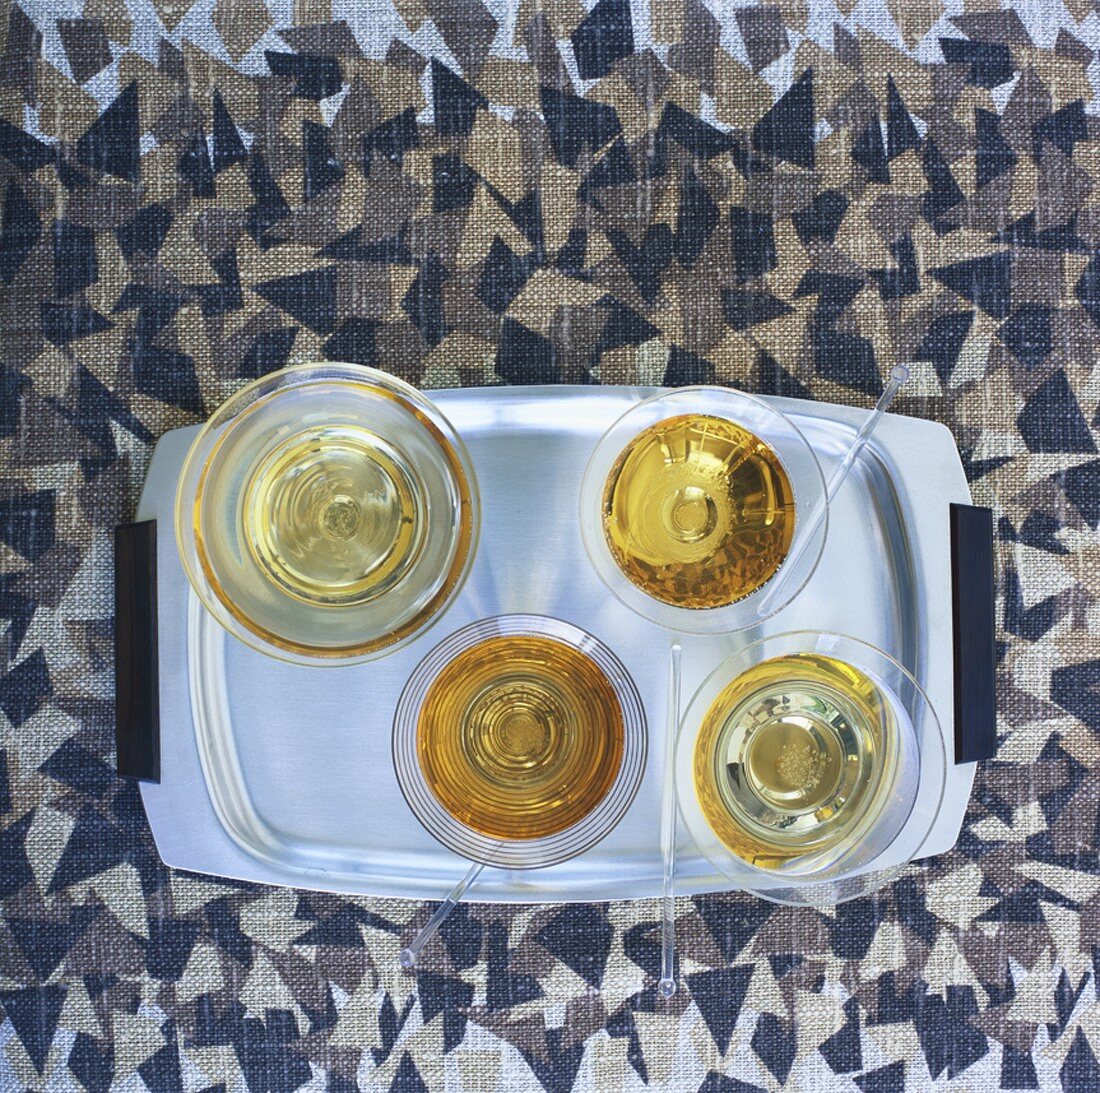 Four glasses of sparkling wine on a tray